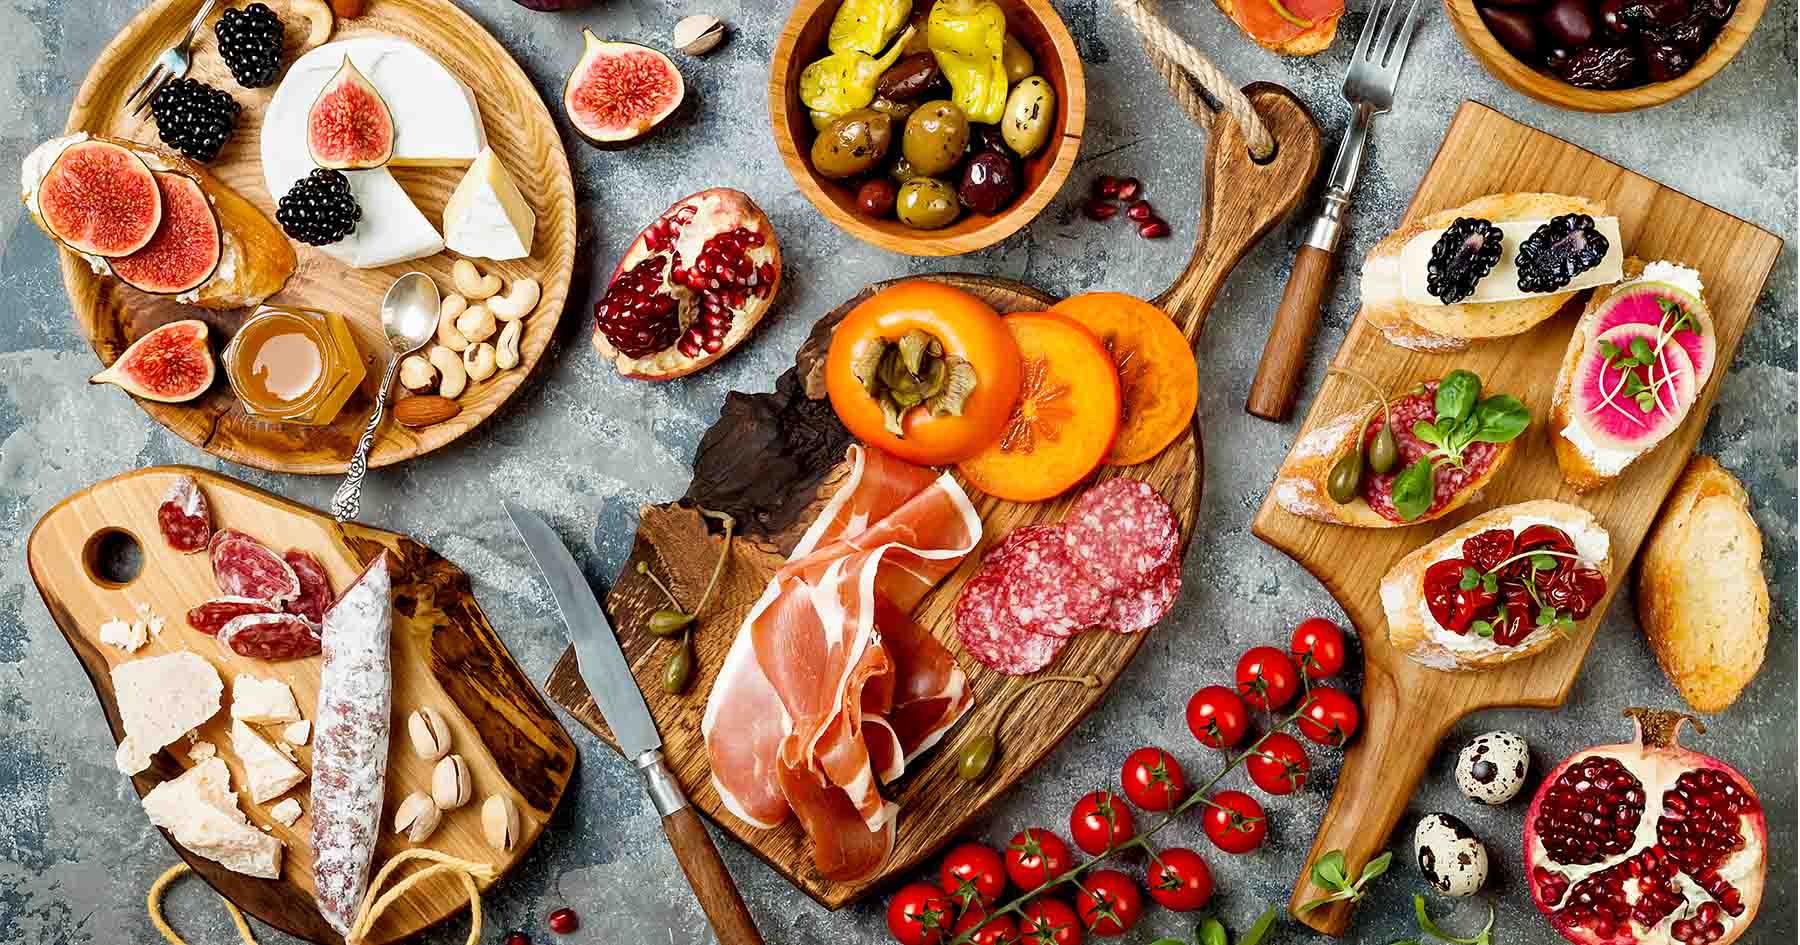 Expansive charcuterie boards with meats, cheeses, fruit and more.